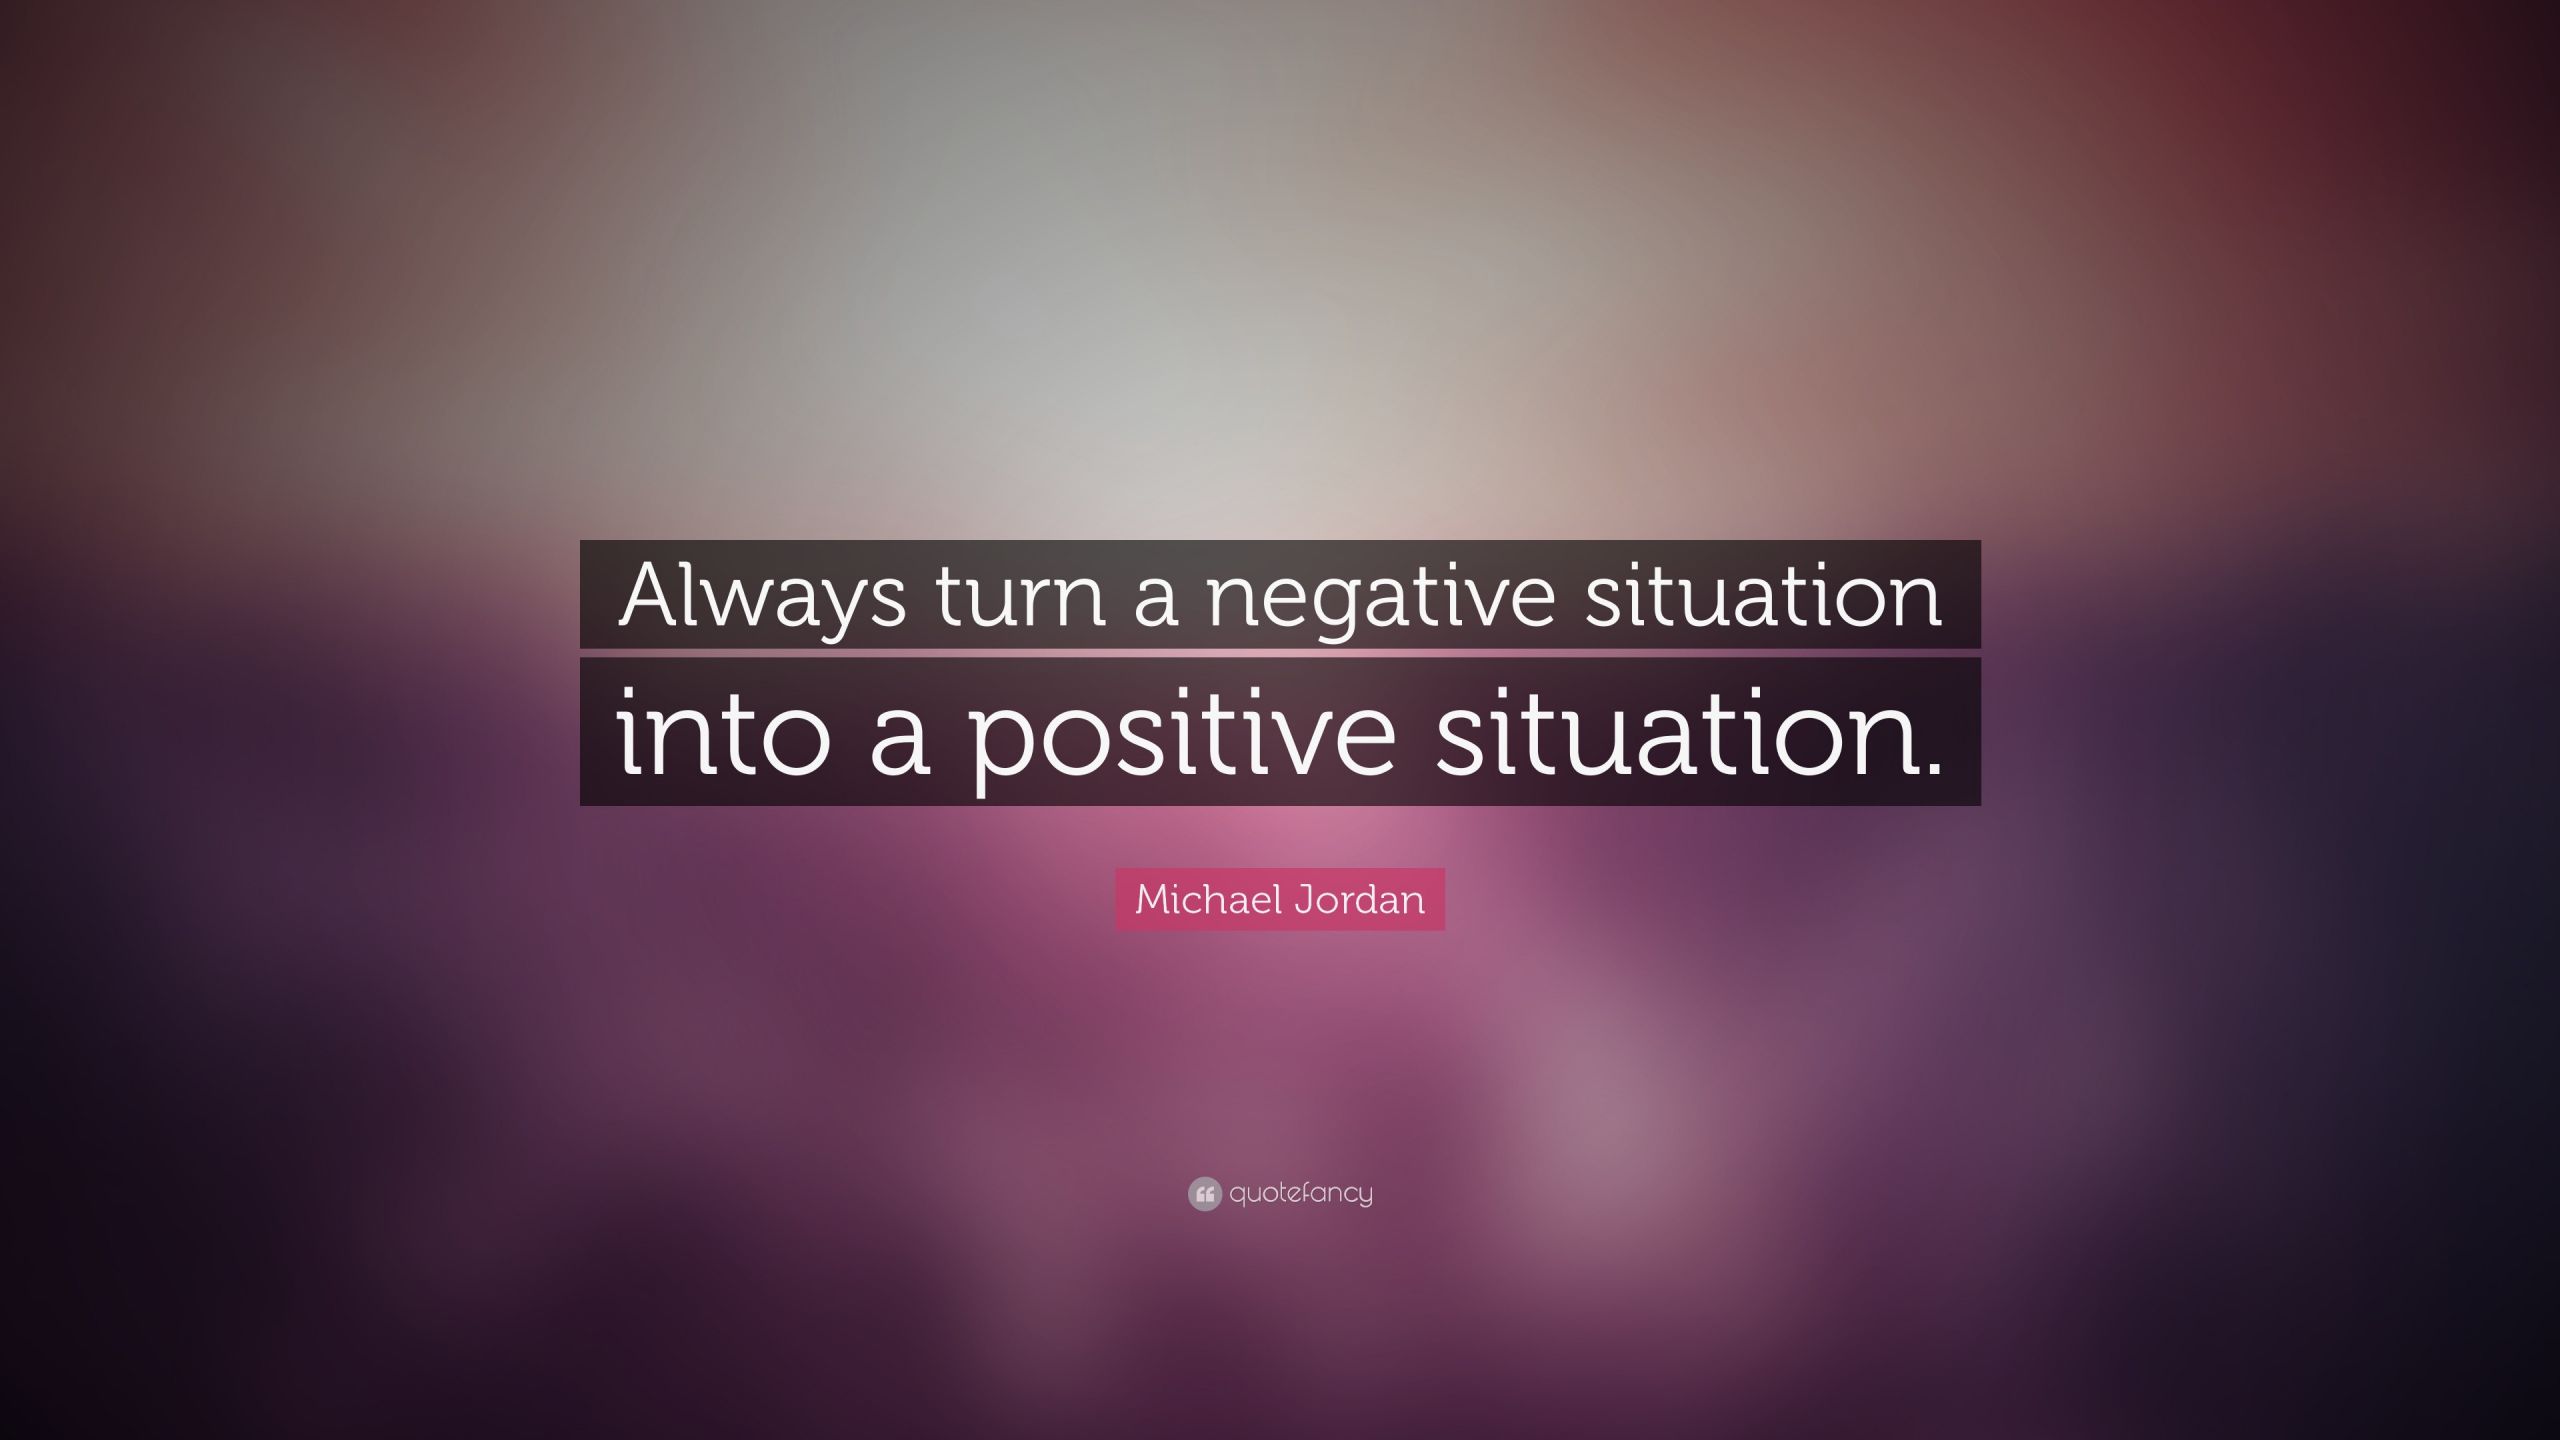 Turning Negatives Into Positives Quotes
 Michael Jordan Quote “Always turn a negative situation